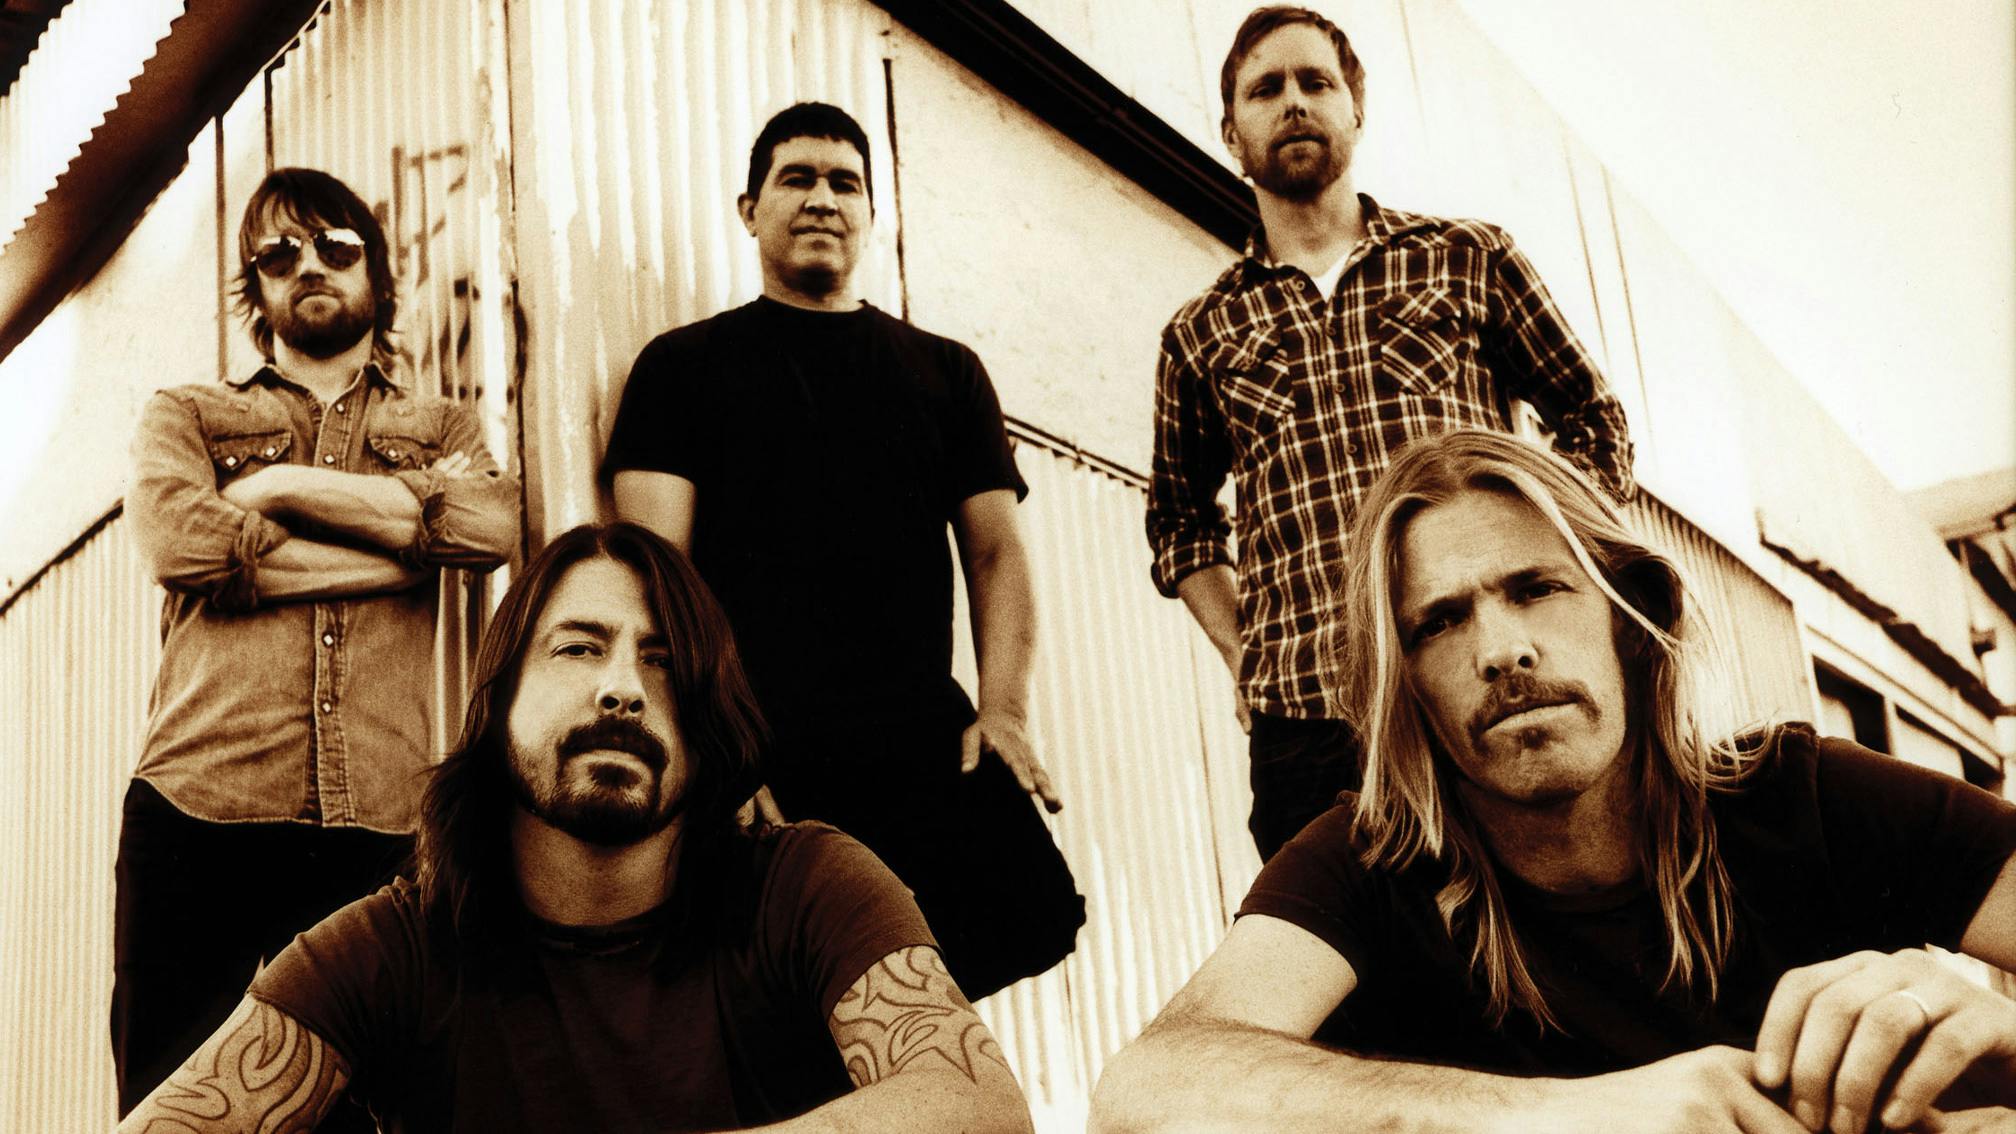 “We’ve all survived and we still love making music”: The story of Foo Fighters’ Wasting Light